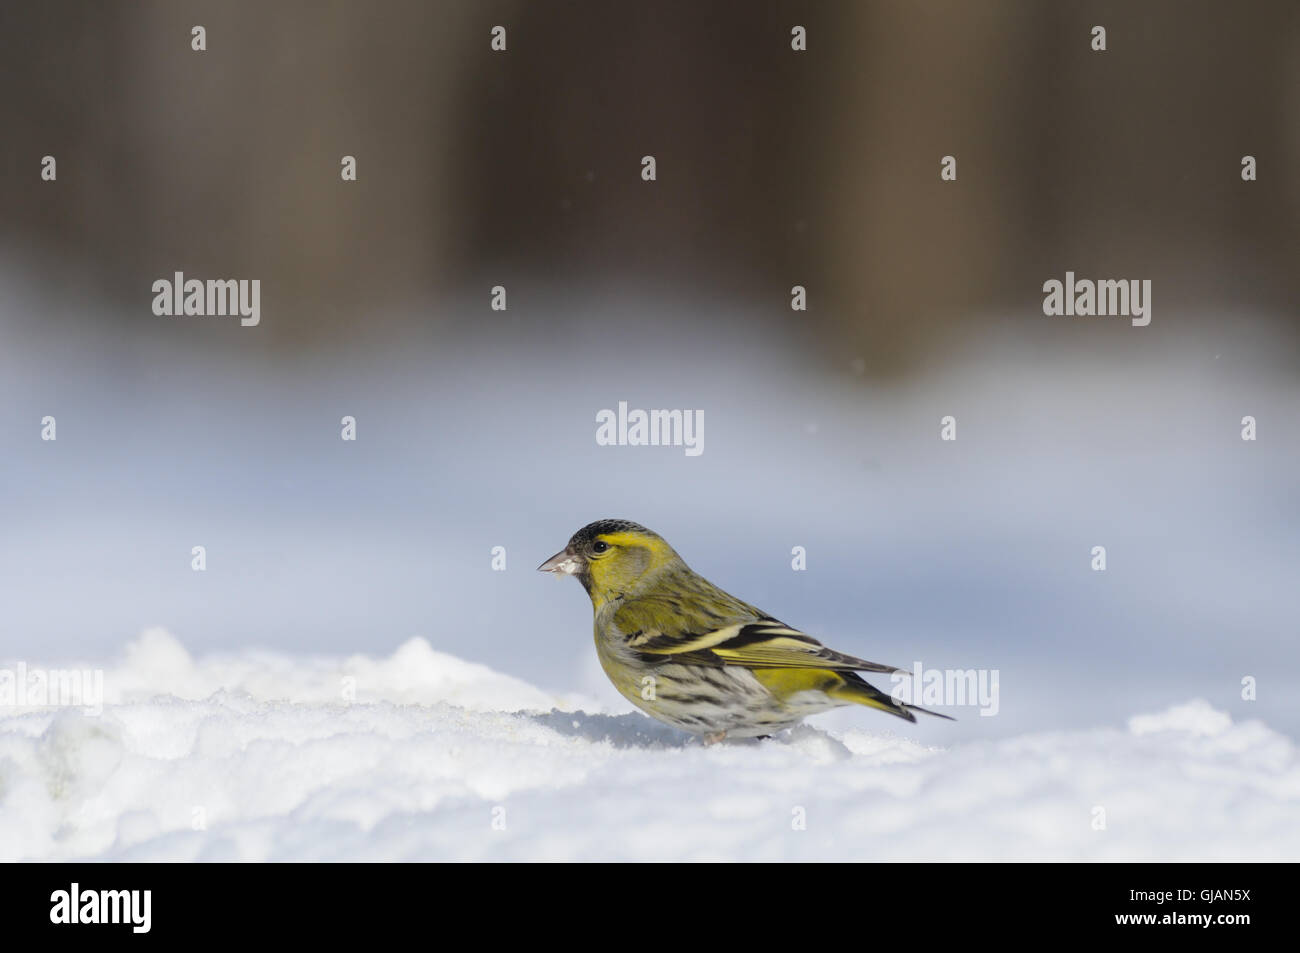 Male siskin (Carduelis spinus) in snow. Moscow region, Russia Stock Photo